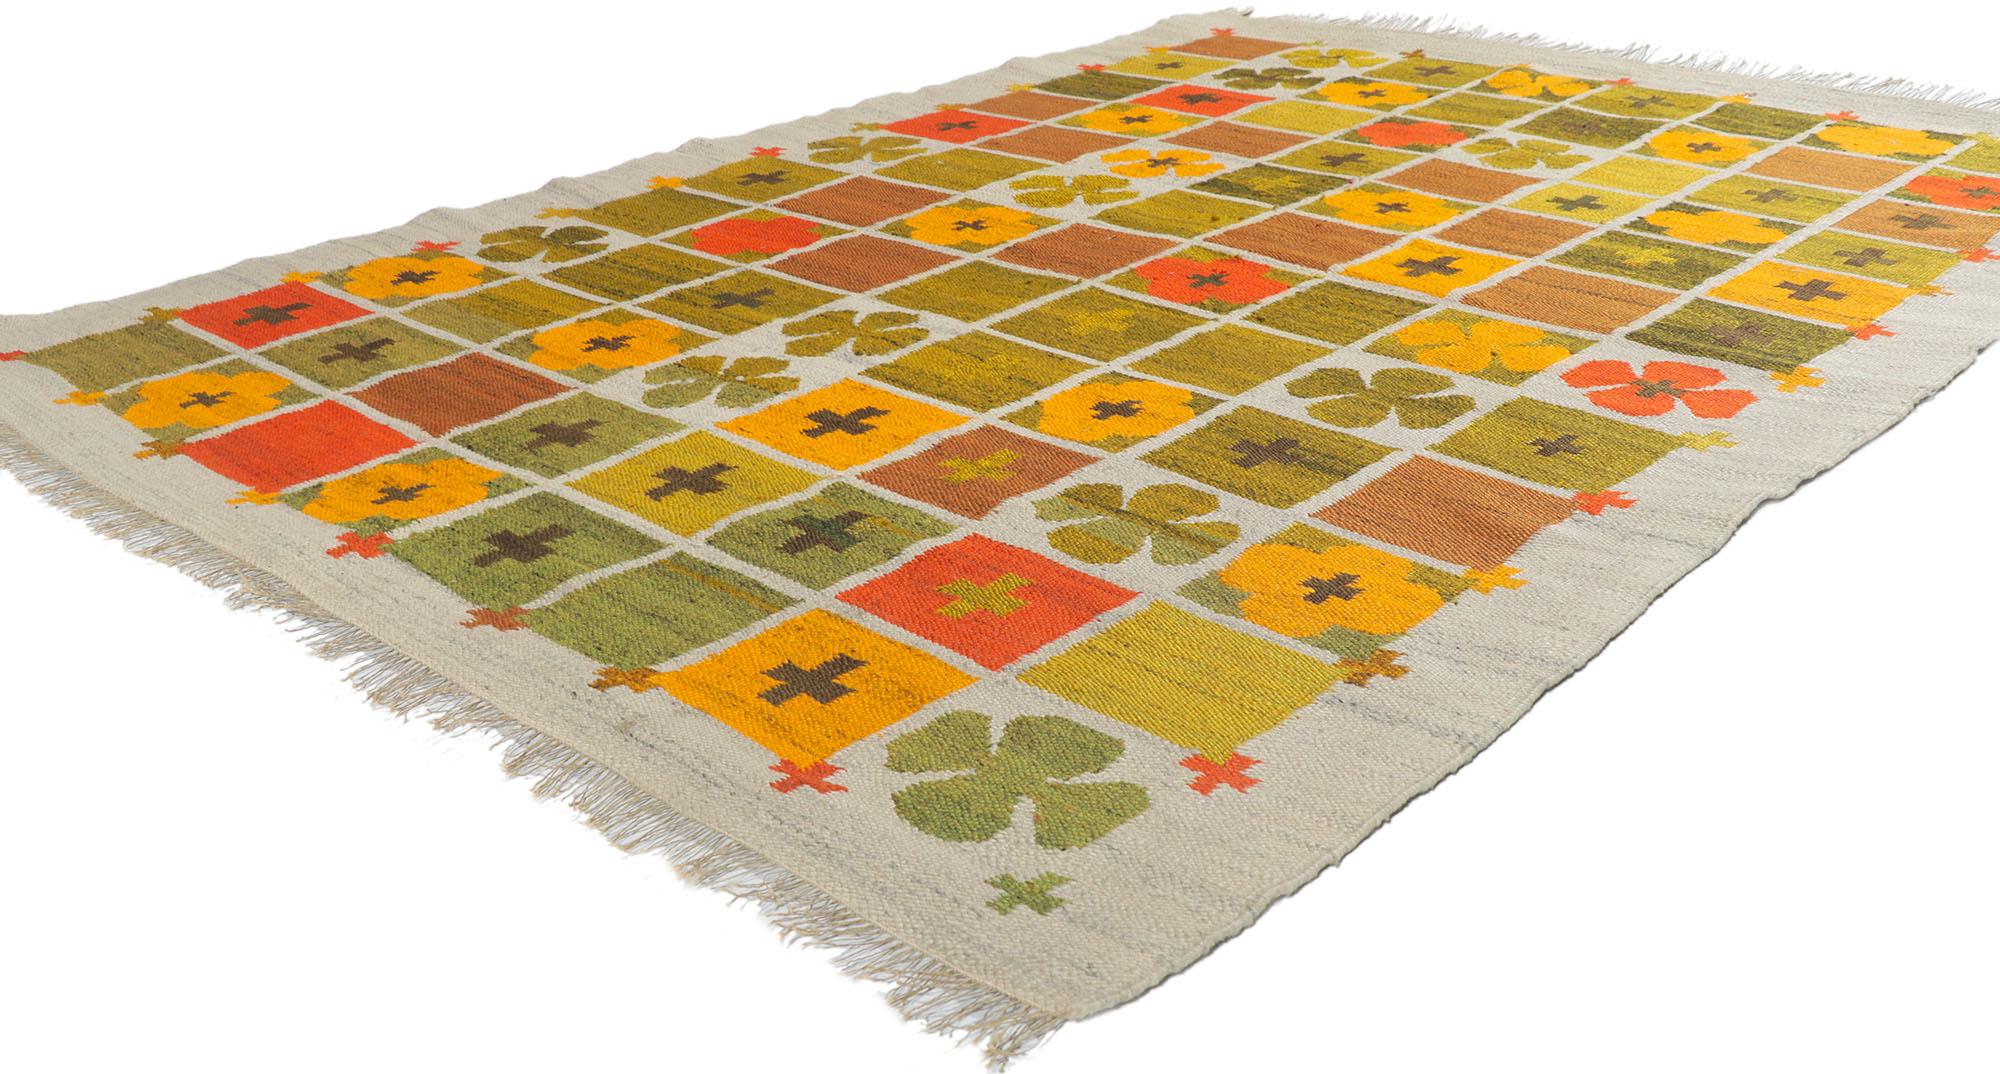 78280 Vintage Polish Rollakan Kilim Rug, 04'08 x 06'05. A Polish rollakan rug is a traditional flat-weave rug from Poland, distinguished by intricate geometric patterns and vibrant colors. Handwoven using interlocking threads, these rugs are